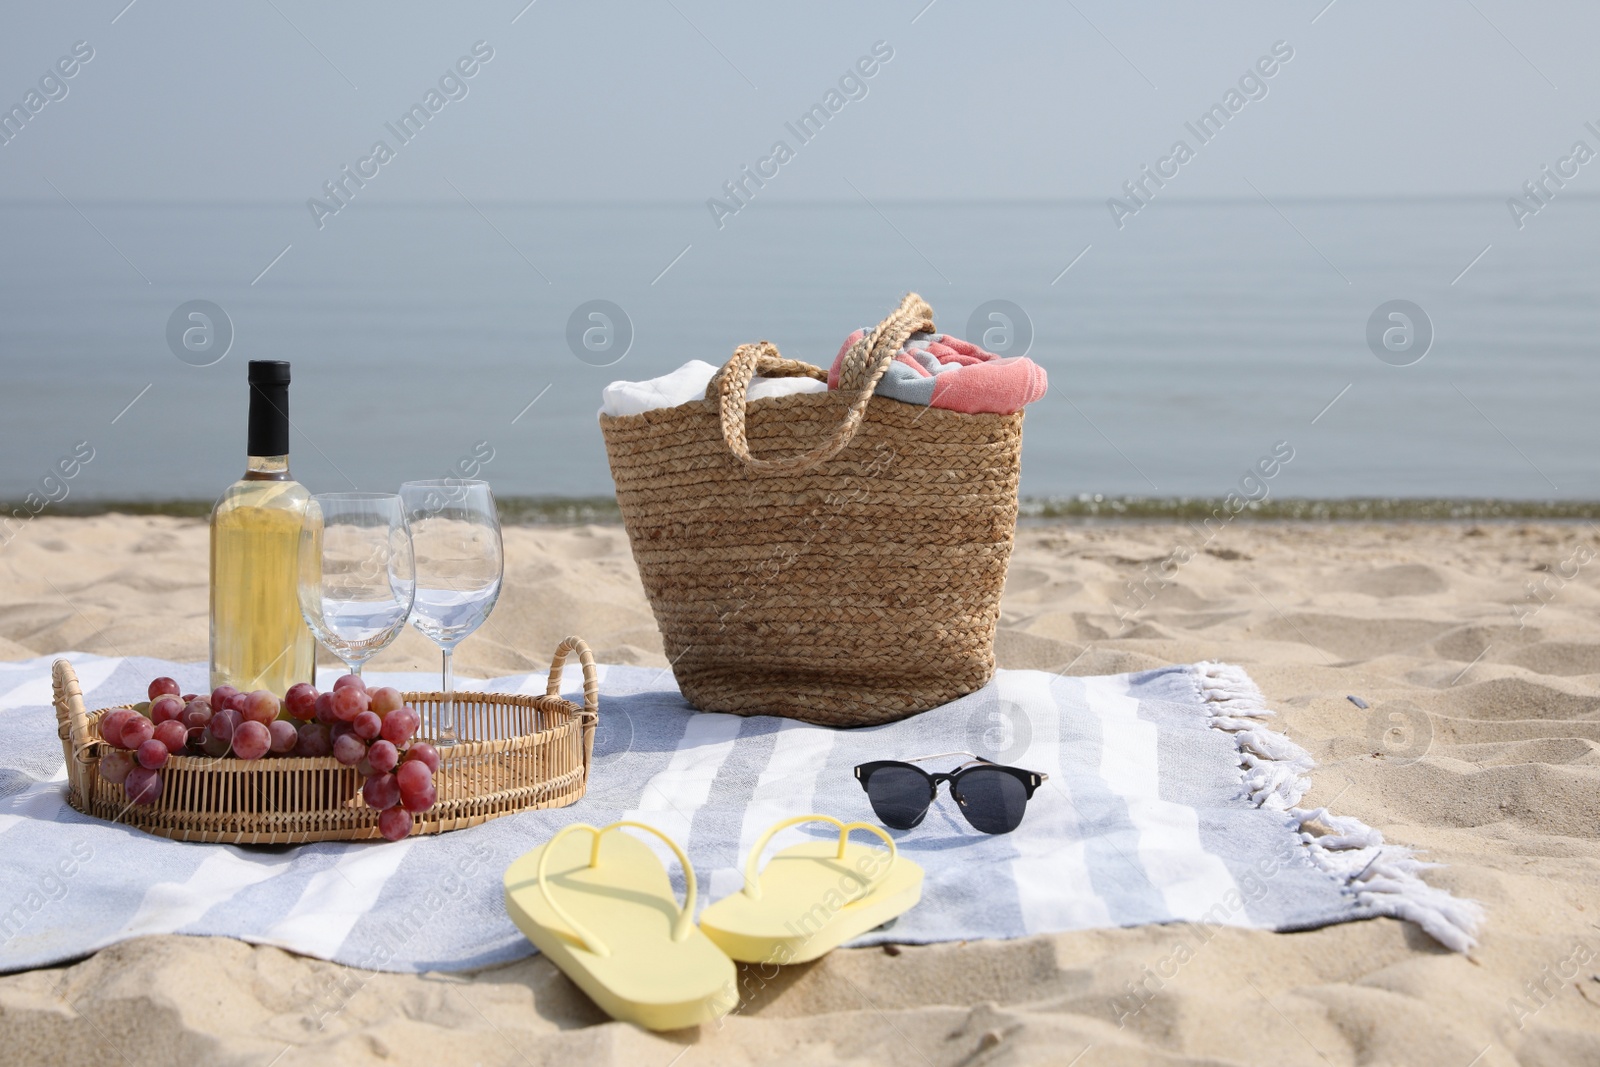 Photo of Bag, blanket, wine and other stuff for beach picnic on sandy seashore